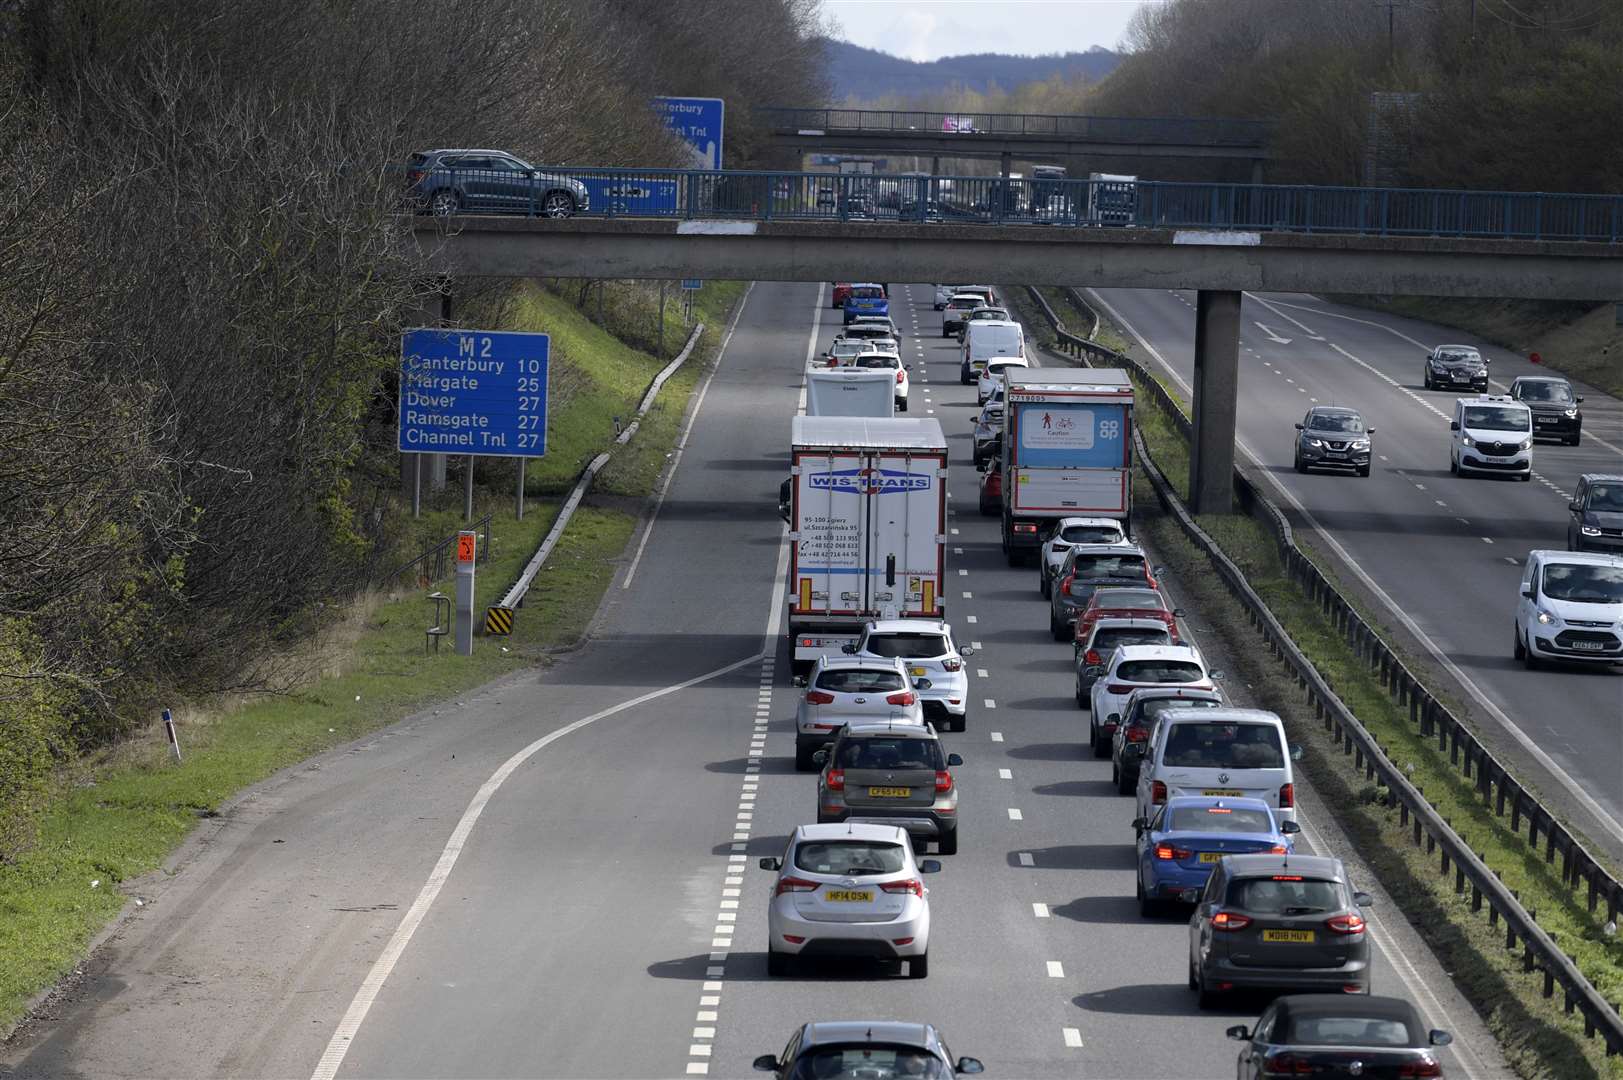 The M2 near to Brenley Corner has suffered from bad congestion over the past couple of weeks